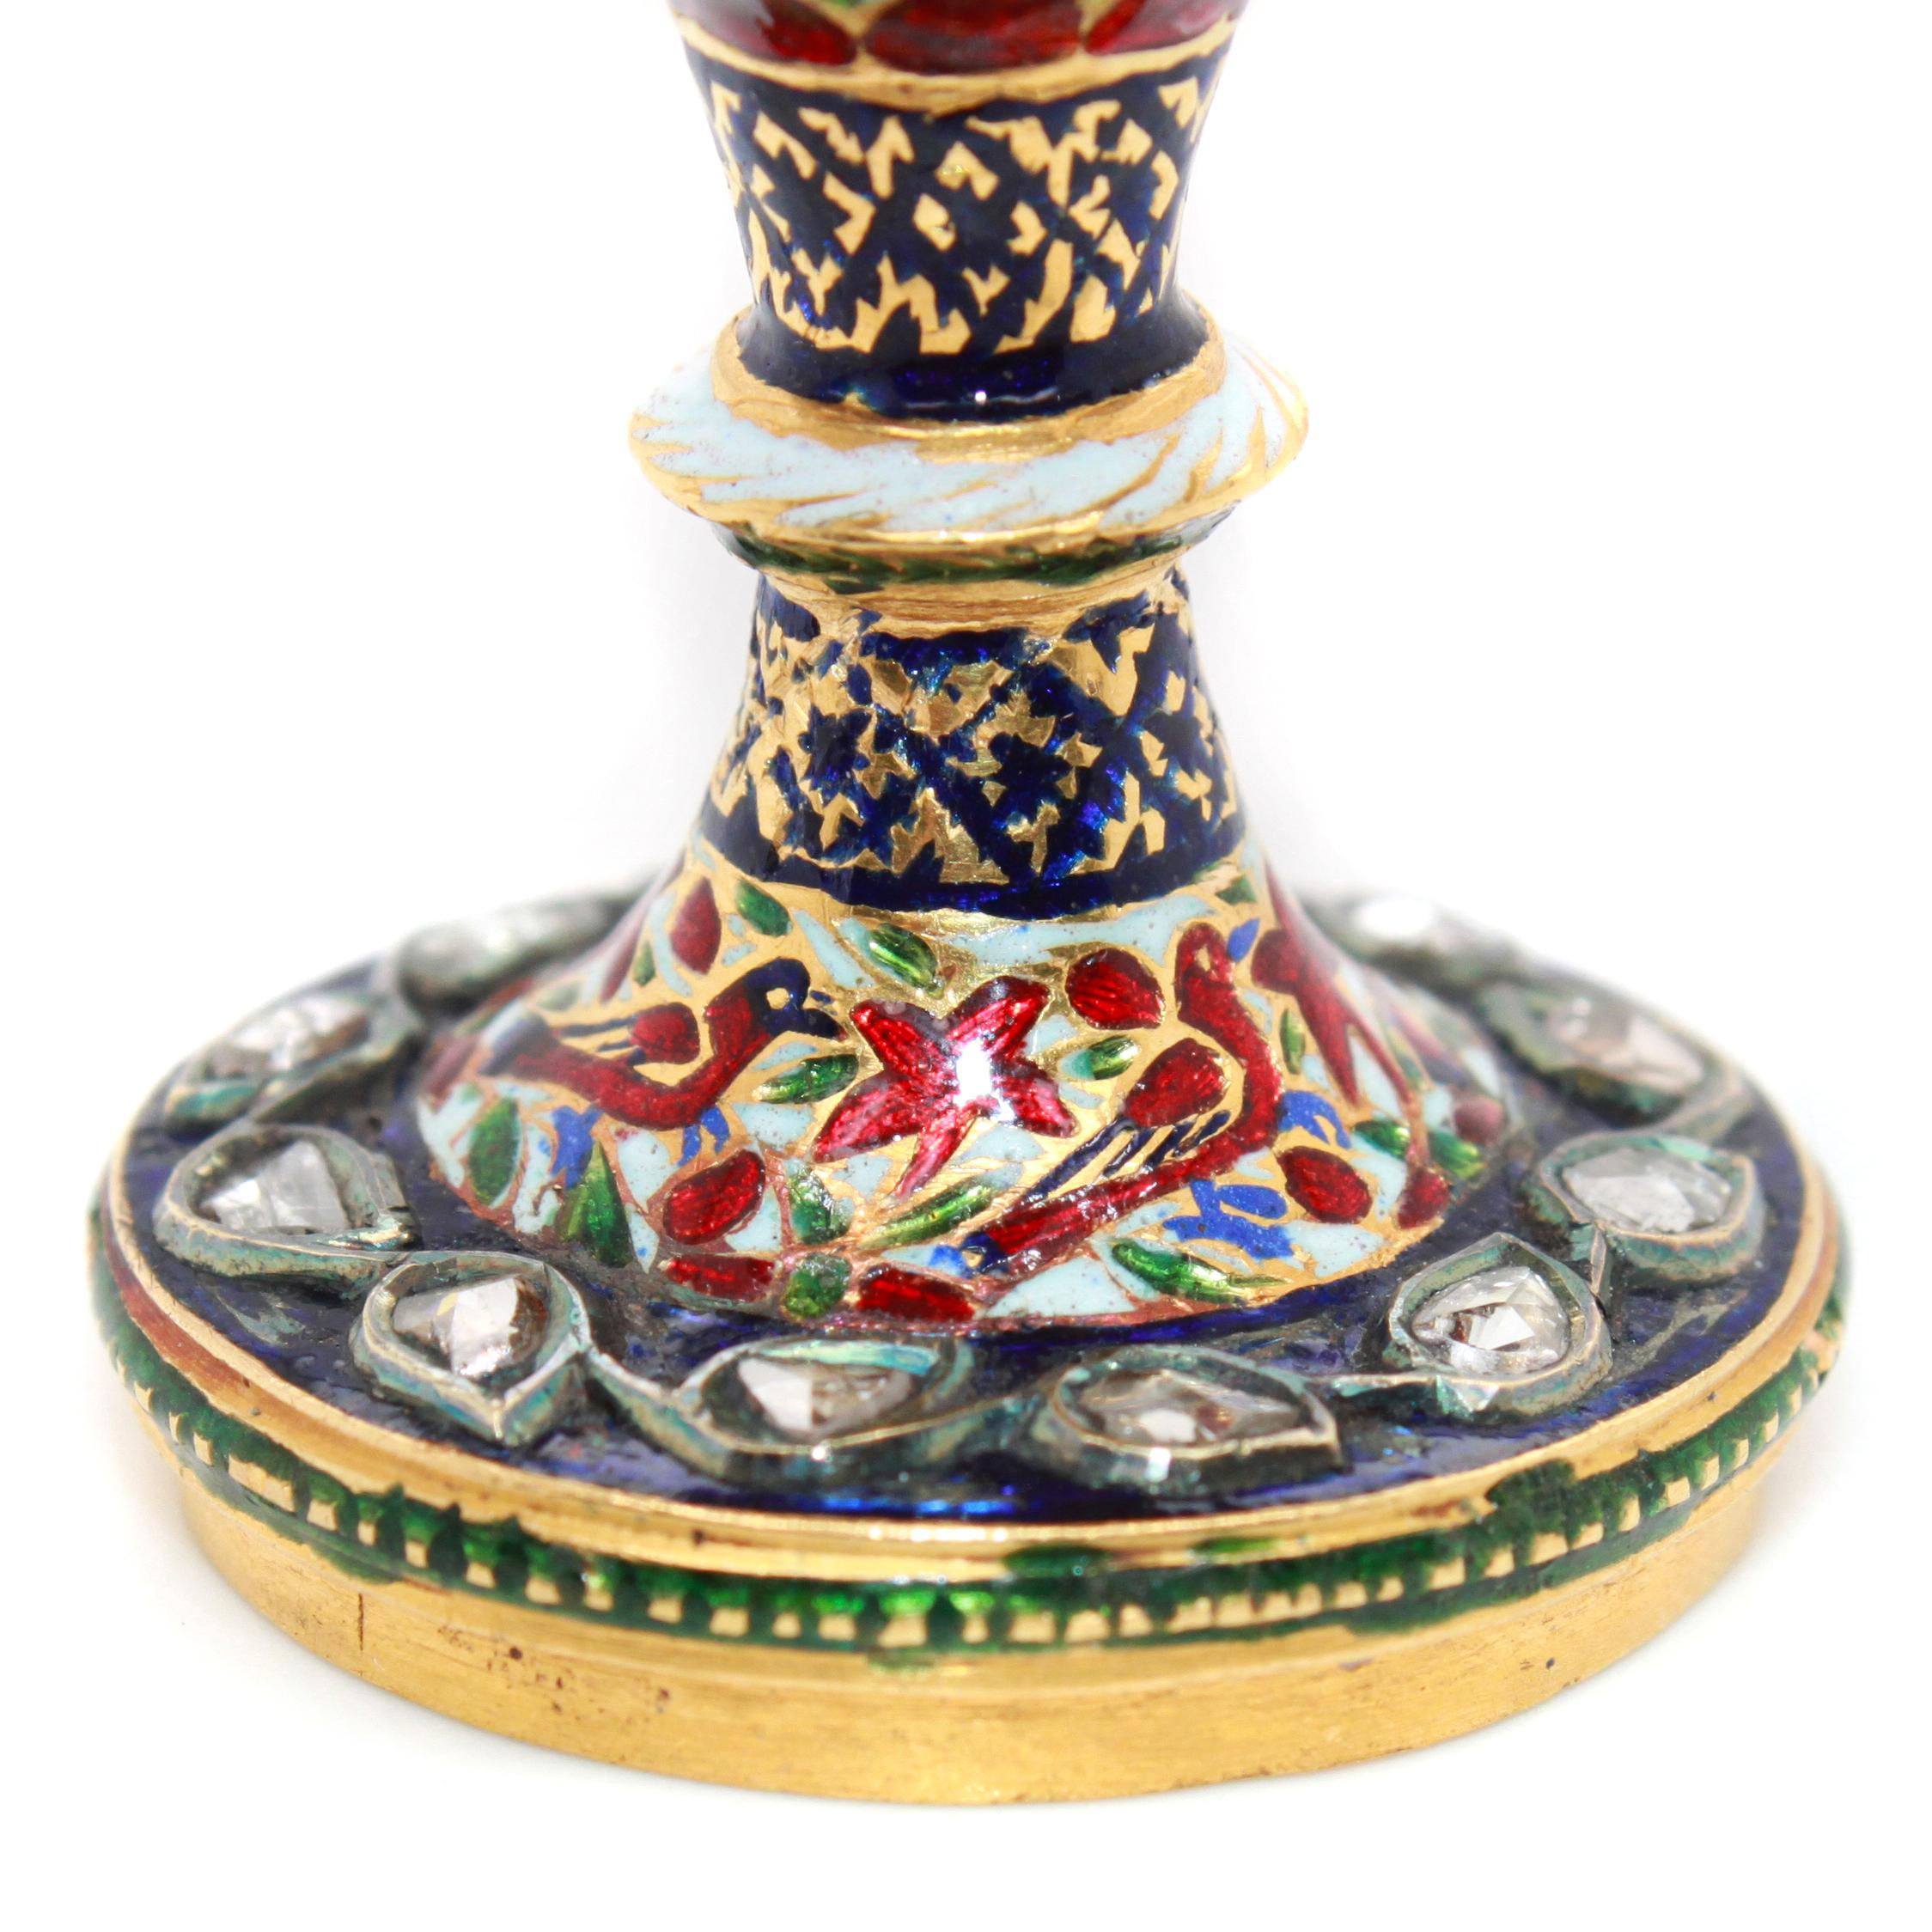 Rare Mughal Enamel and Diamond Cup, Early 19th Century For Sale 2